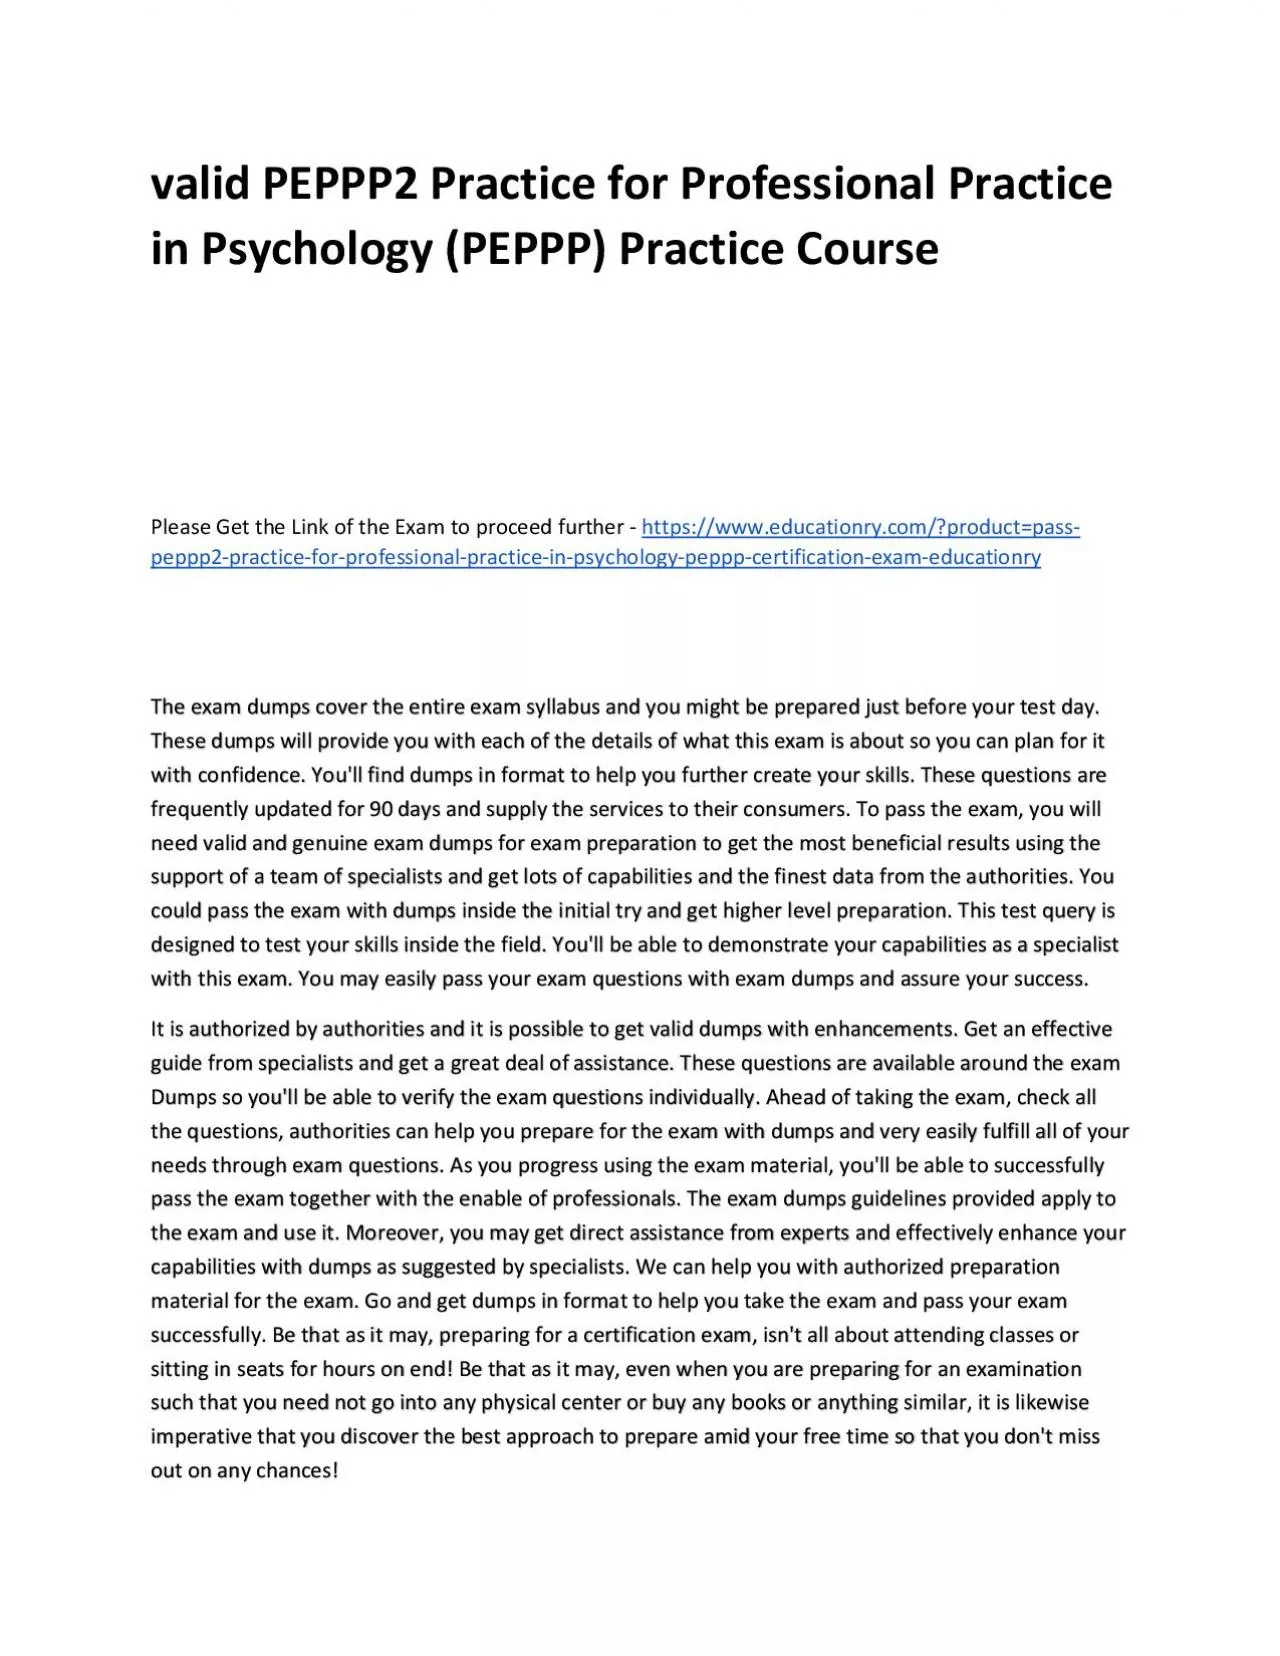 Valid PEPPP2 Practice for Professional Practice in Psychology (PEPPP) Practice Course